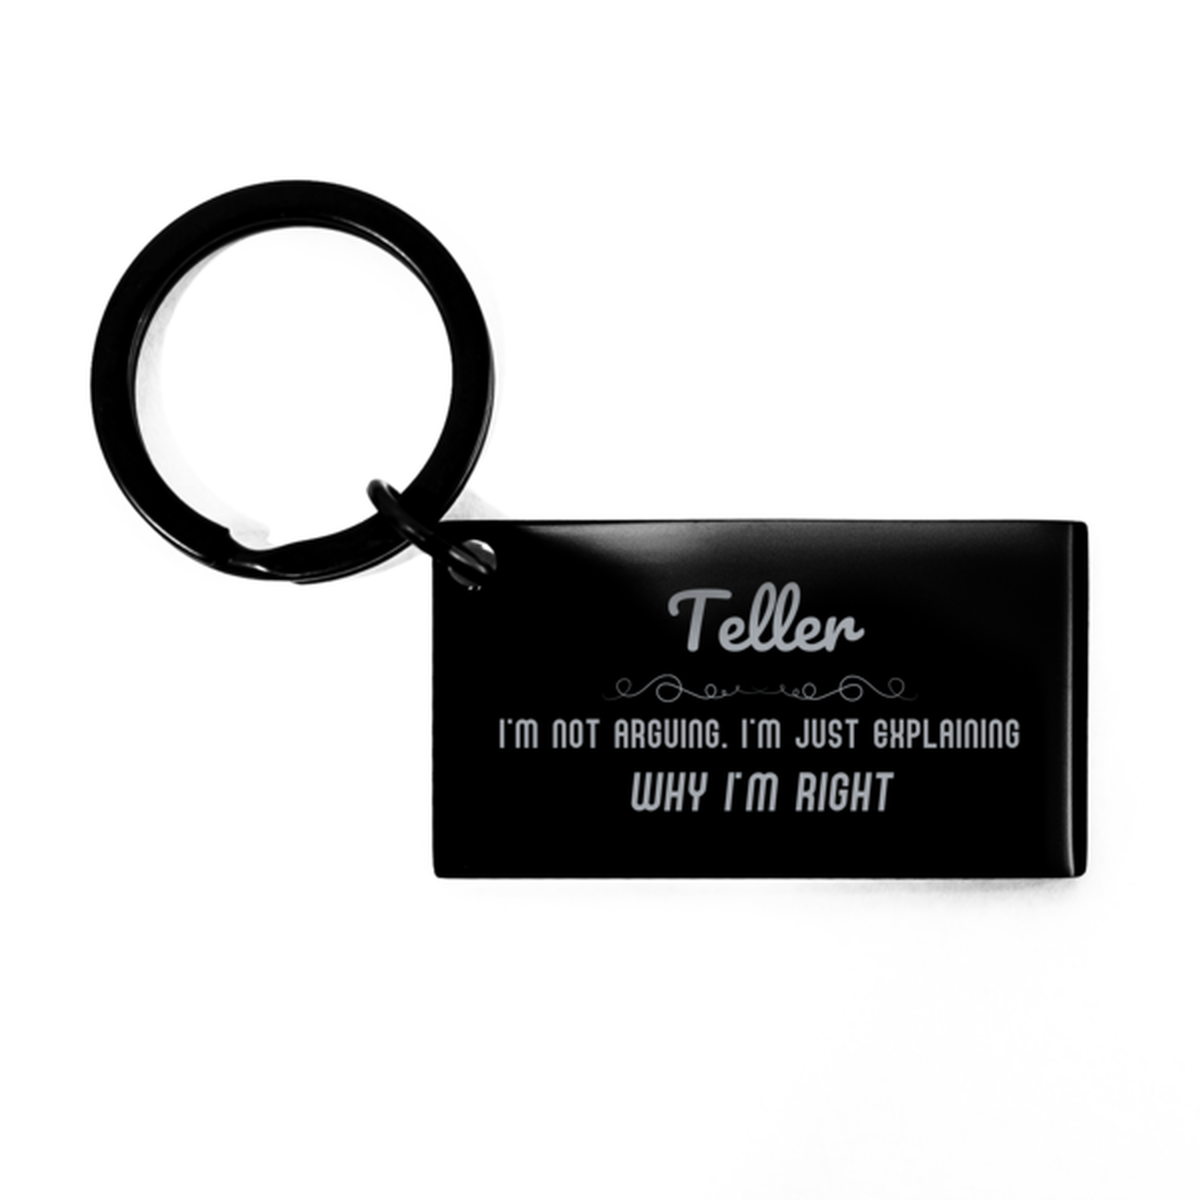 Teller I'm not Arguing. I'm Just Explaining Why I'm RIGHT Keychain, Funny Saying Quote Teller Gifts For Teller Graduation Birthday Christmas Gifts for Men Women Coworker